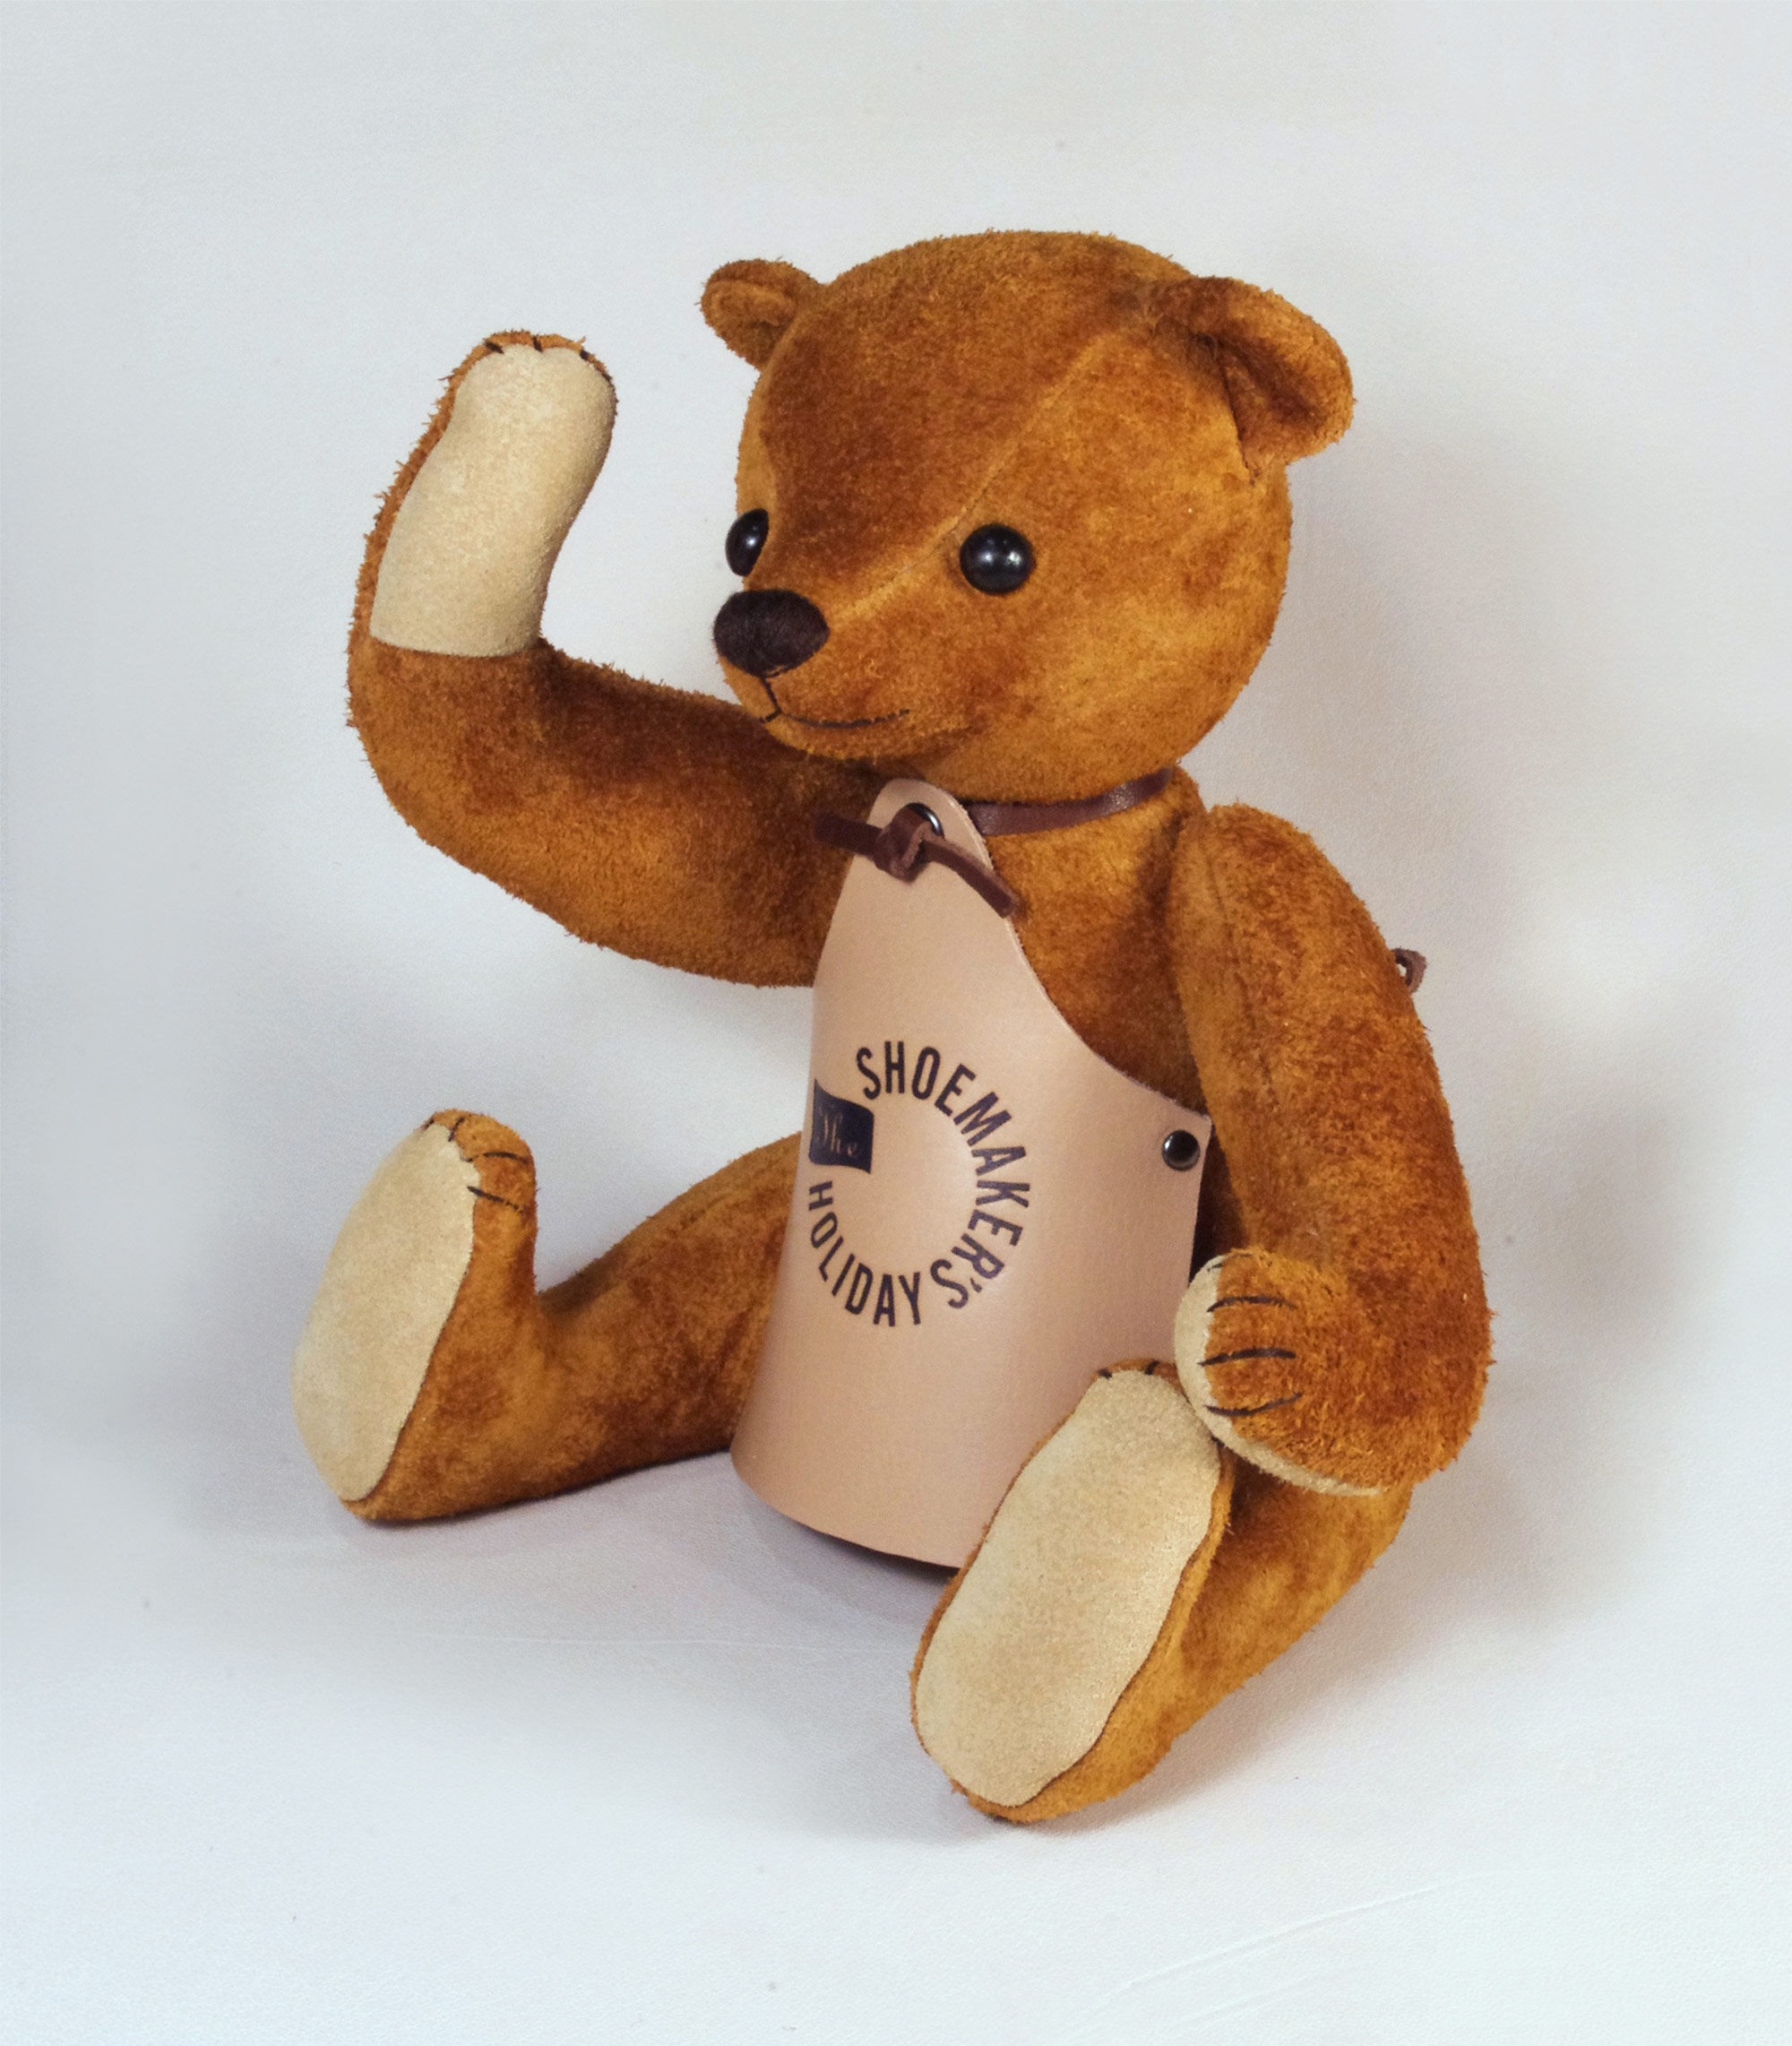 Teddybear wearing leather apron punched with logo.